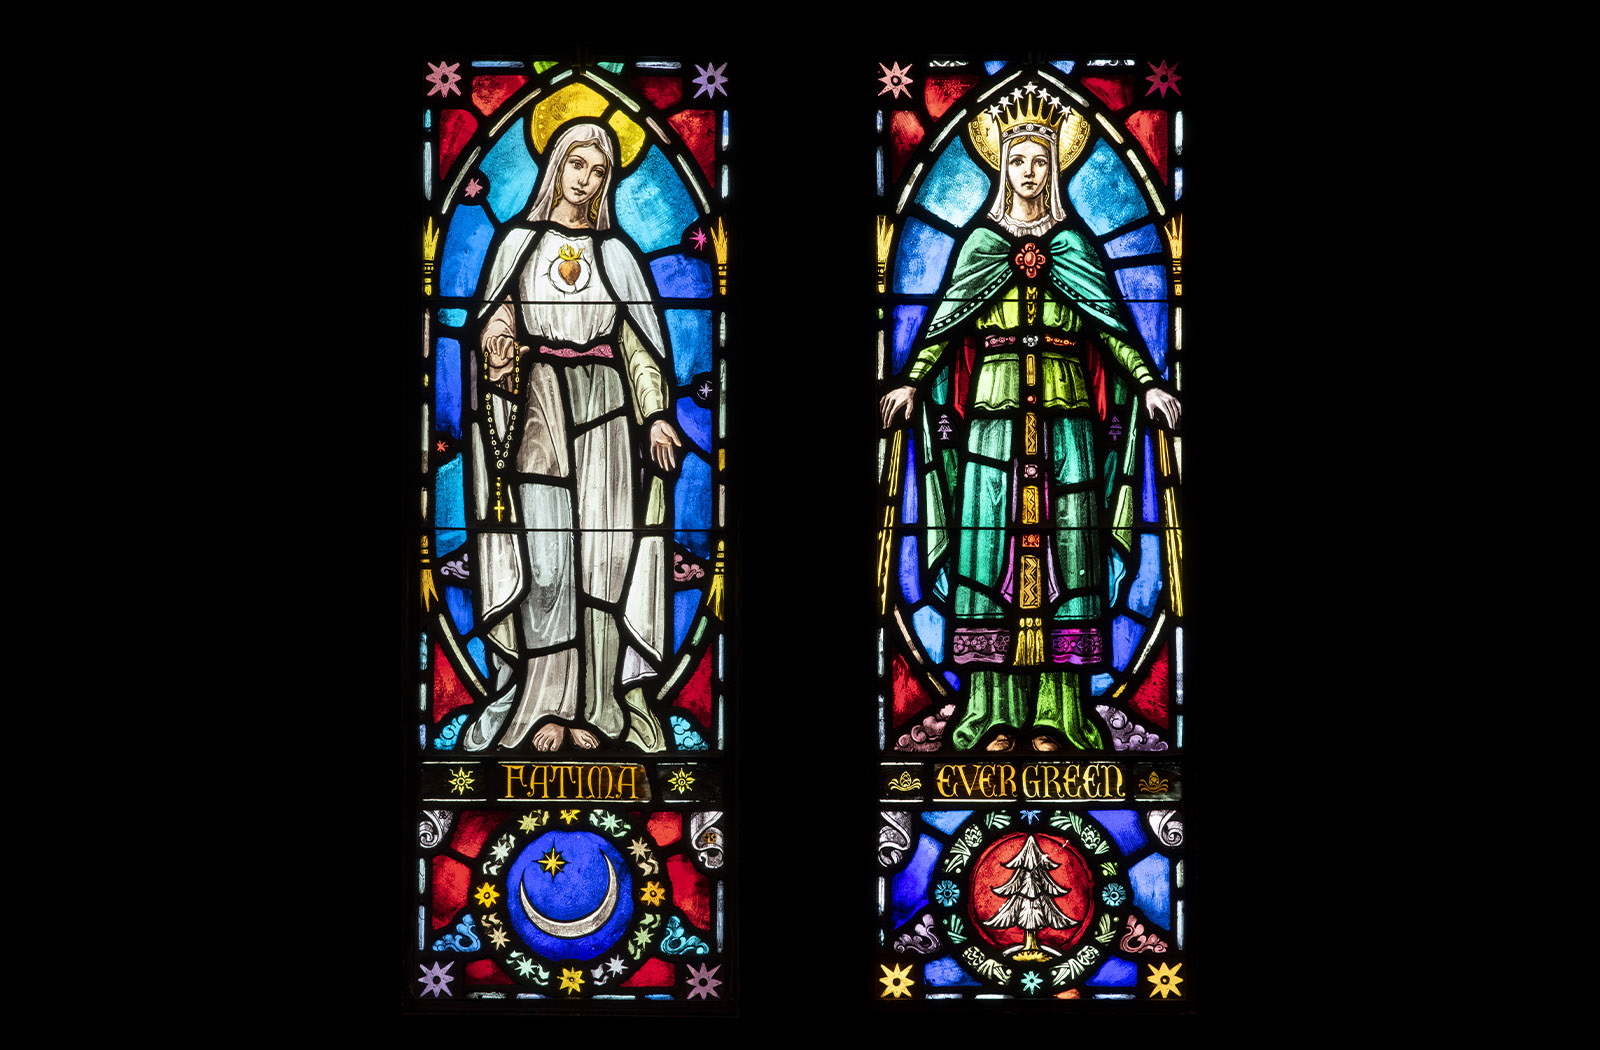 Two colorful stained glass panels of Our Lady of Fatima and Our Lady of Evergreen